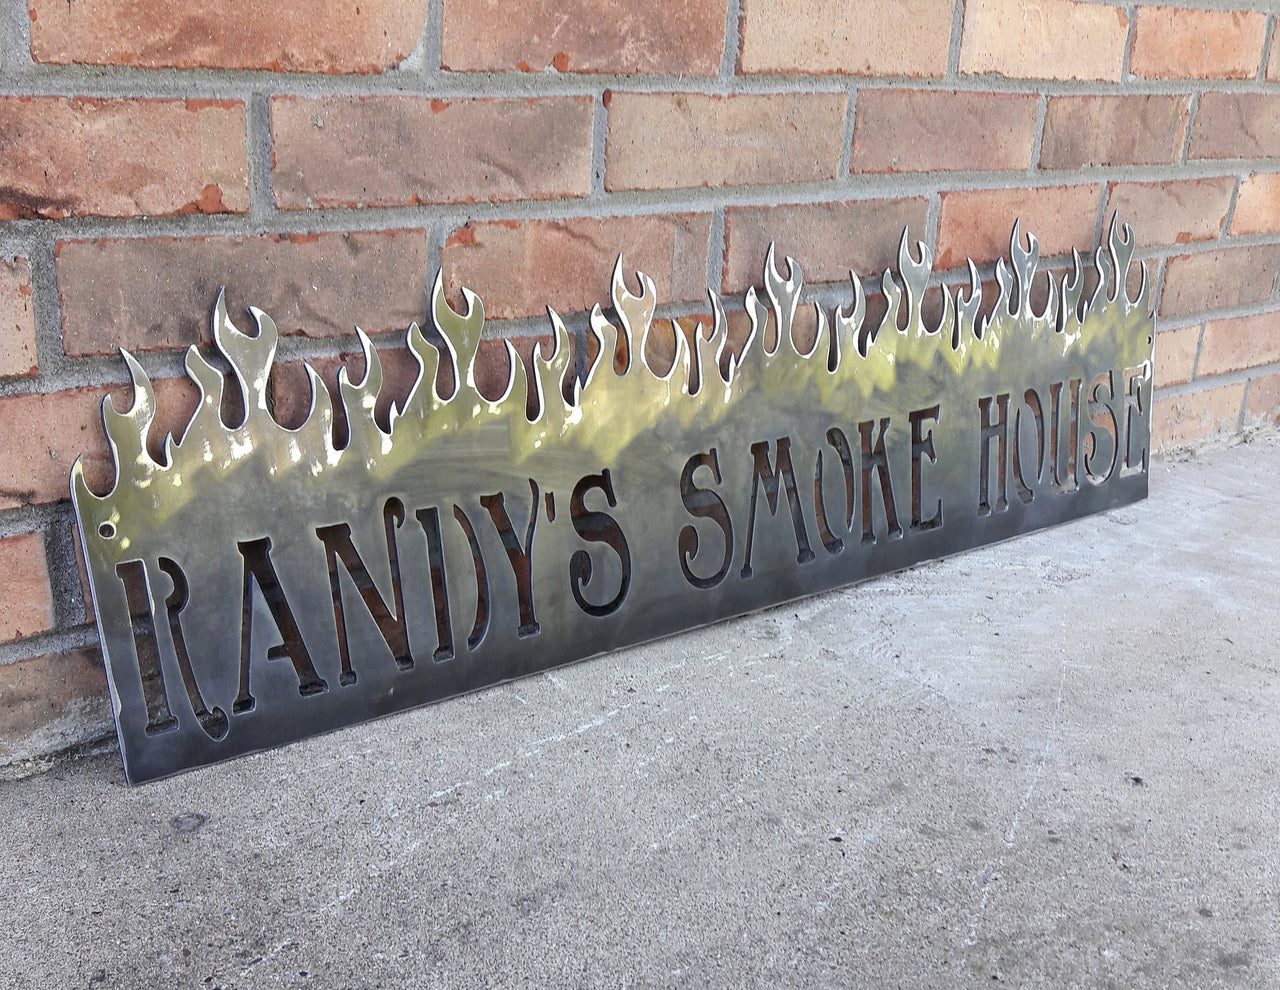 This is a personalized metal sign that features flames at the top and reads, " Randy's Smoke House".